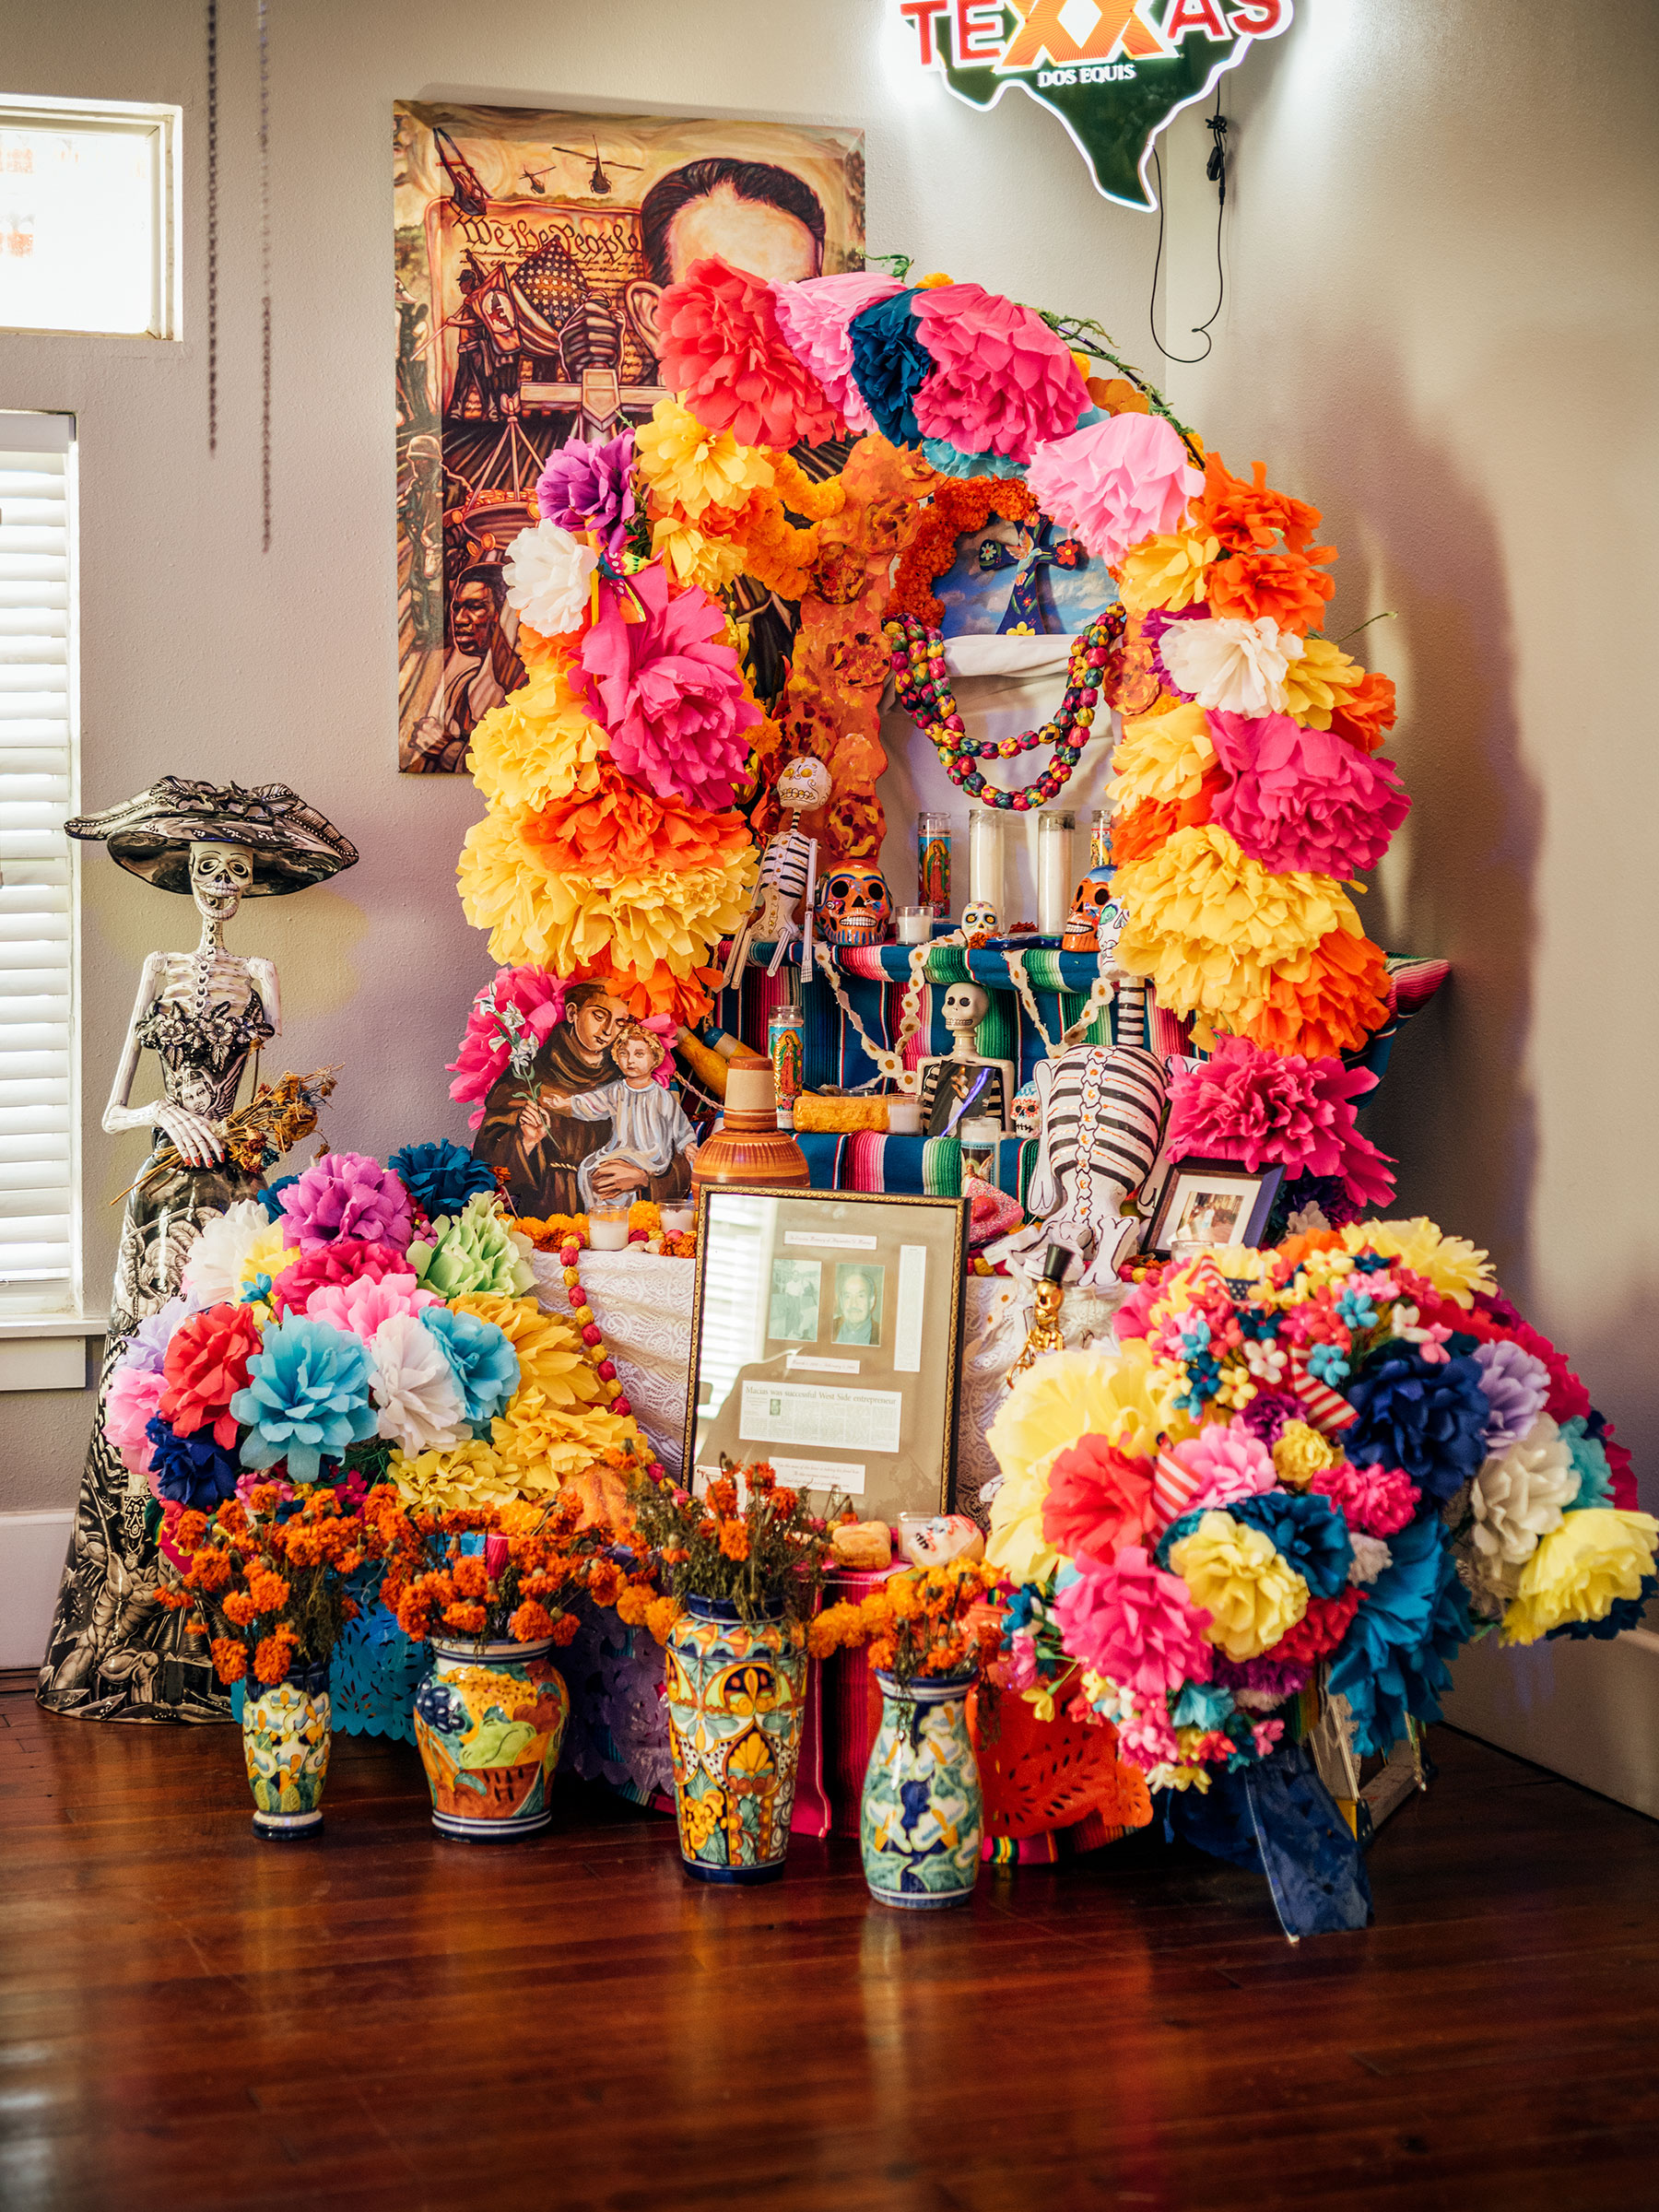 Jaime Macias created an alter inside his business, Jaime's Place, for community members to bring "ofrendas" or offerings for Dia de los Muertos, or Day of the Dead